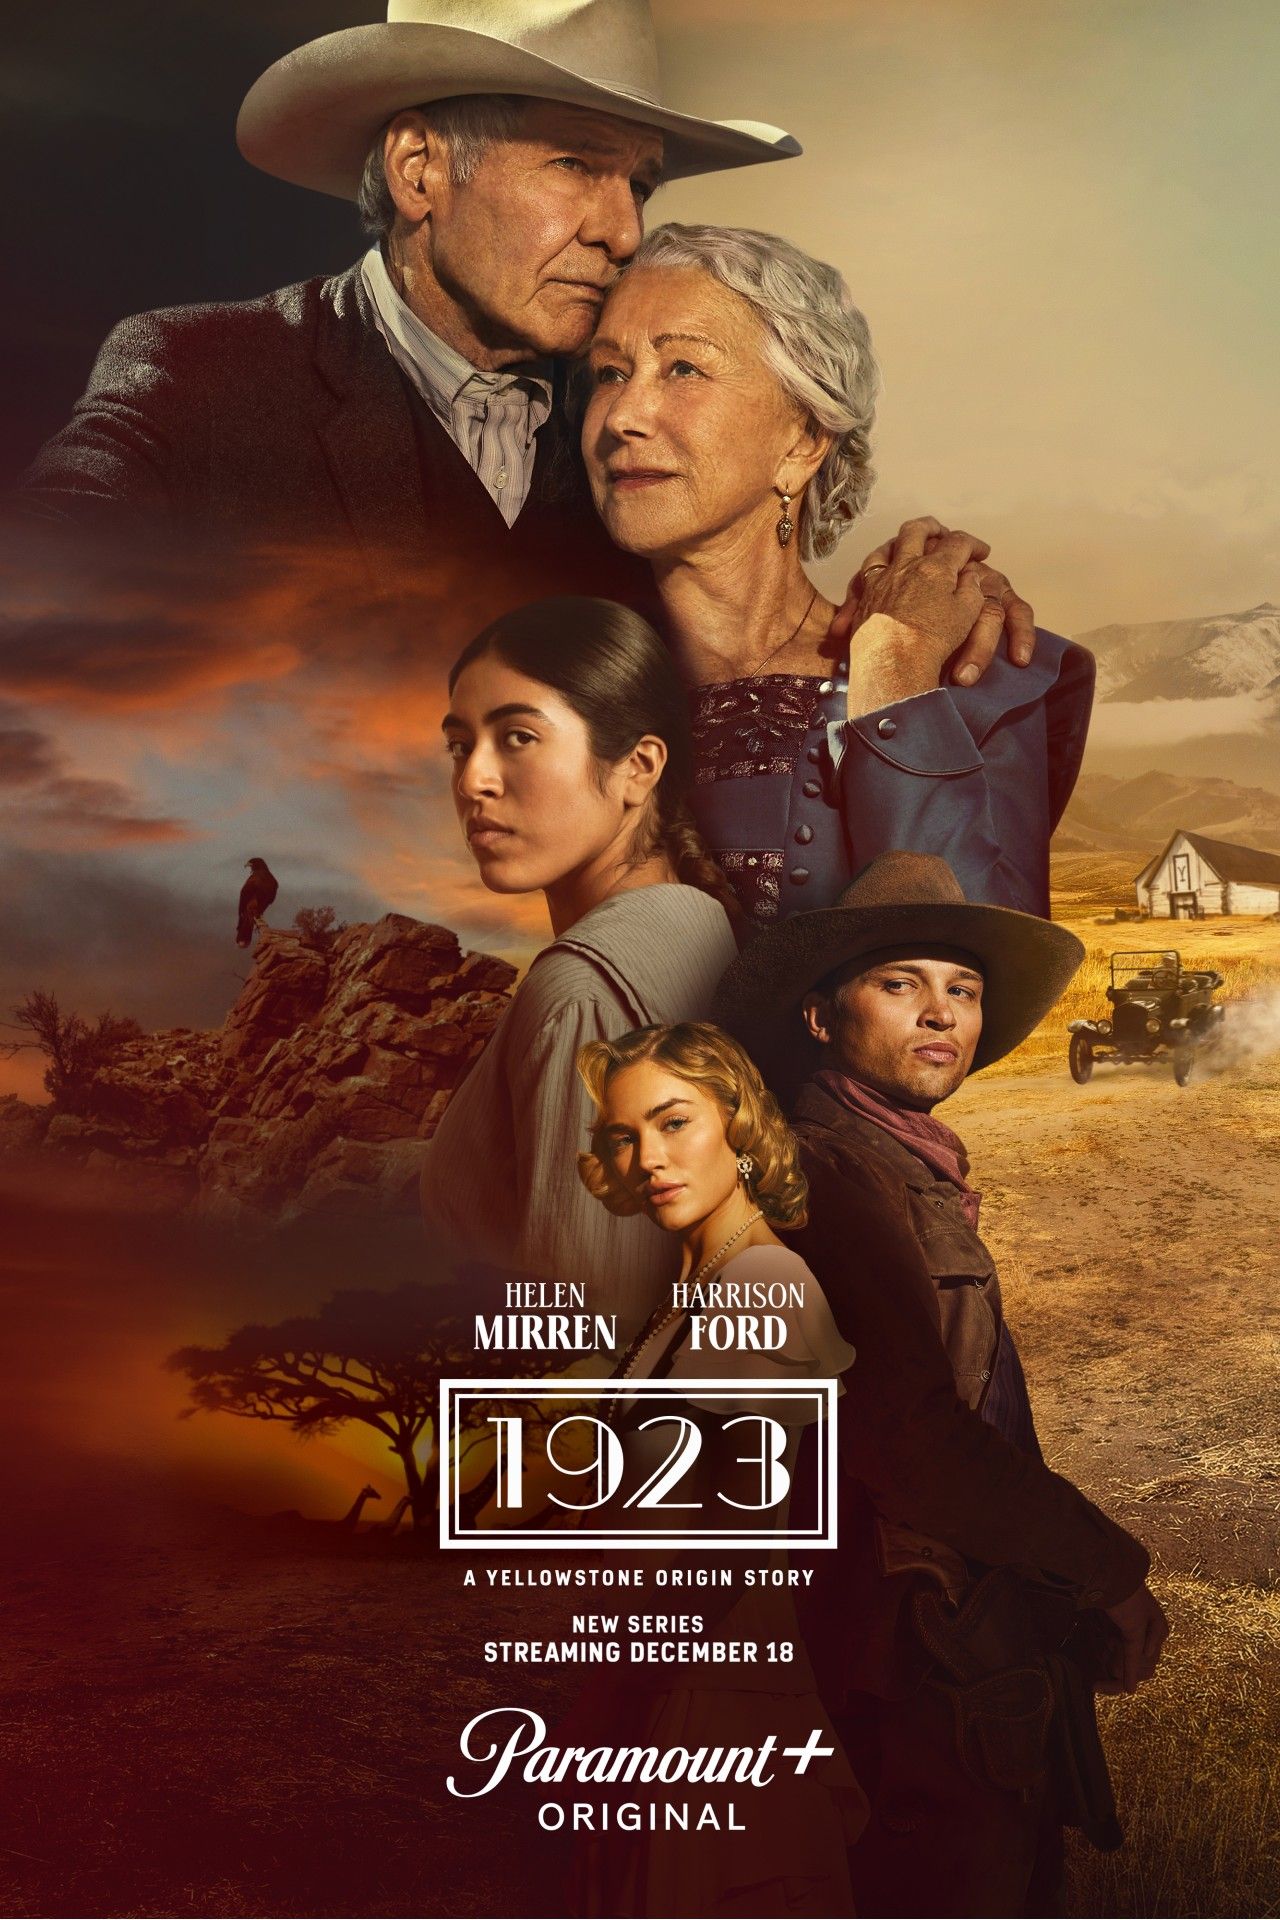 1923 Season 2 Gets A Major Filming Update From Spencer Dutton Actor